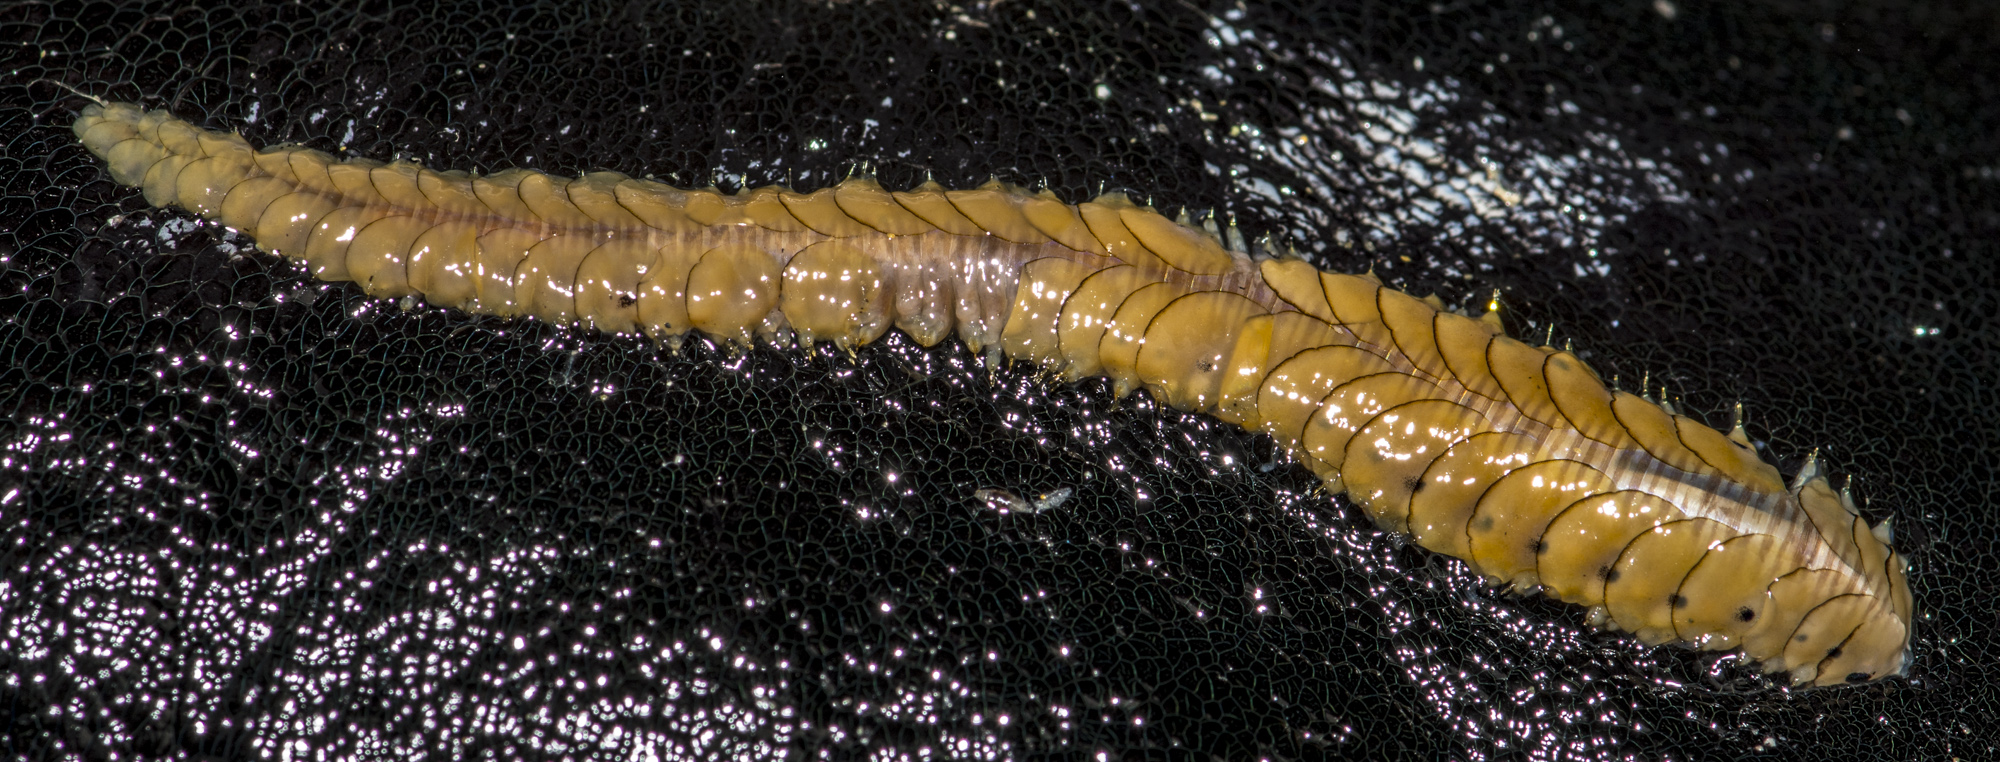 a caterpillar crawls on shiny fabric with black material